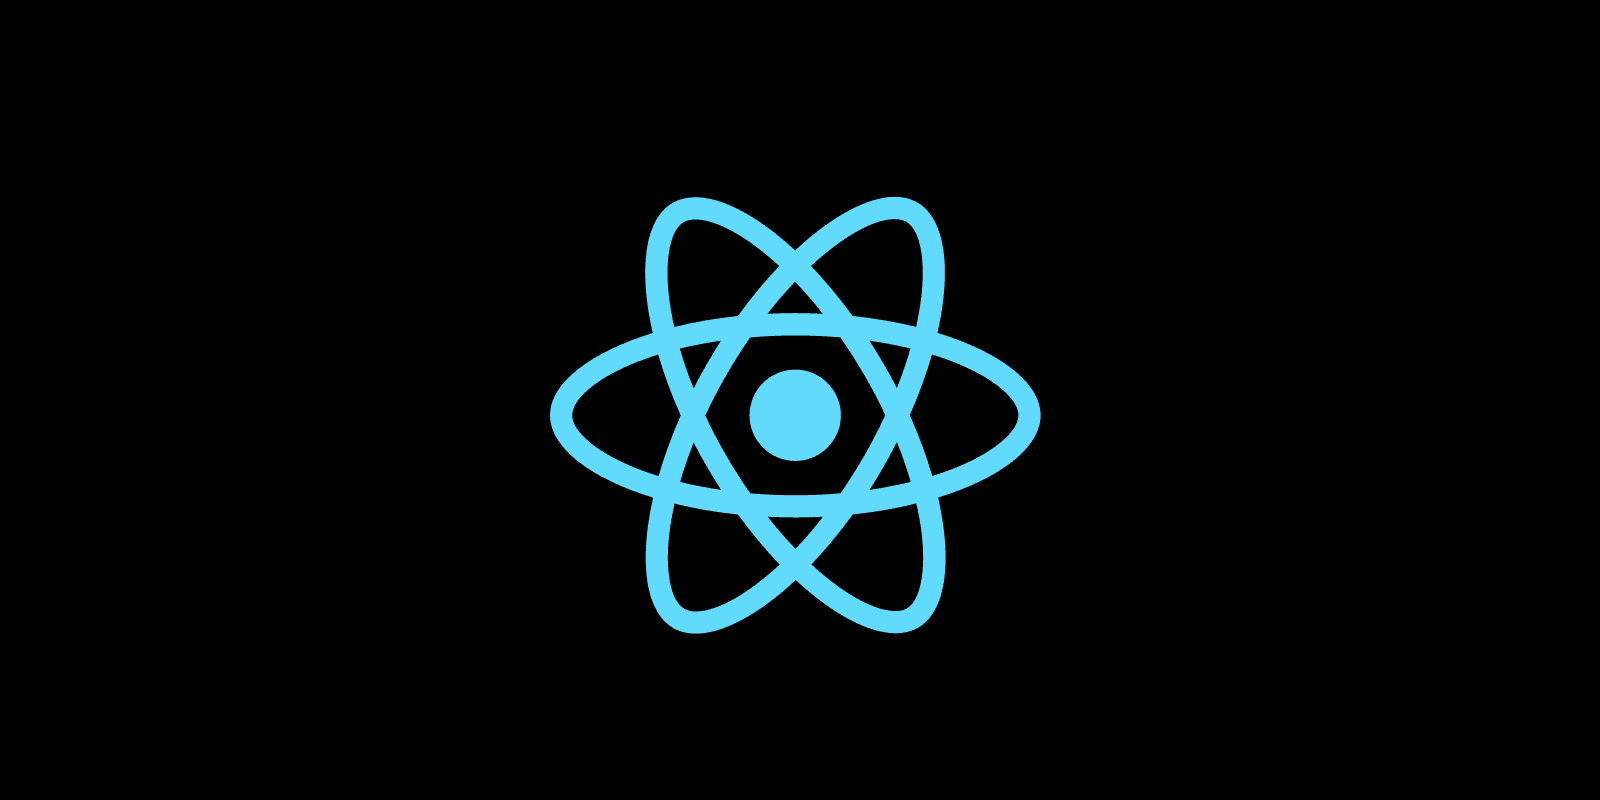 How to use the React useEffect Hook